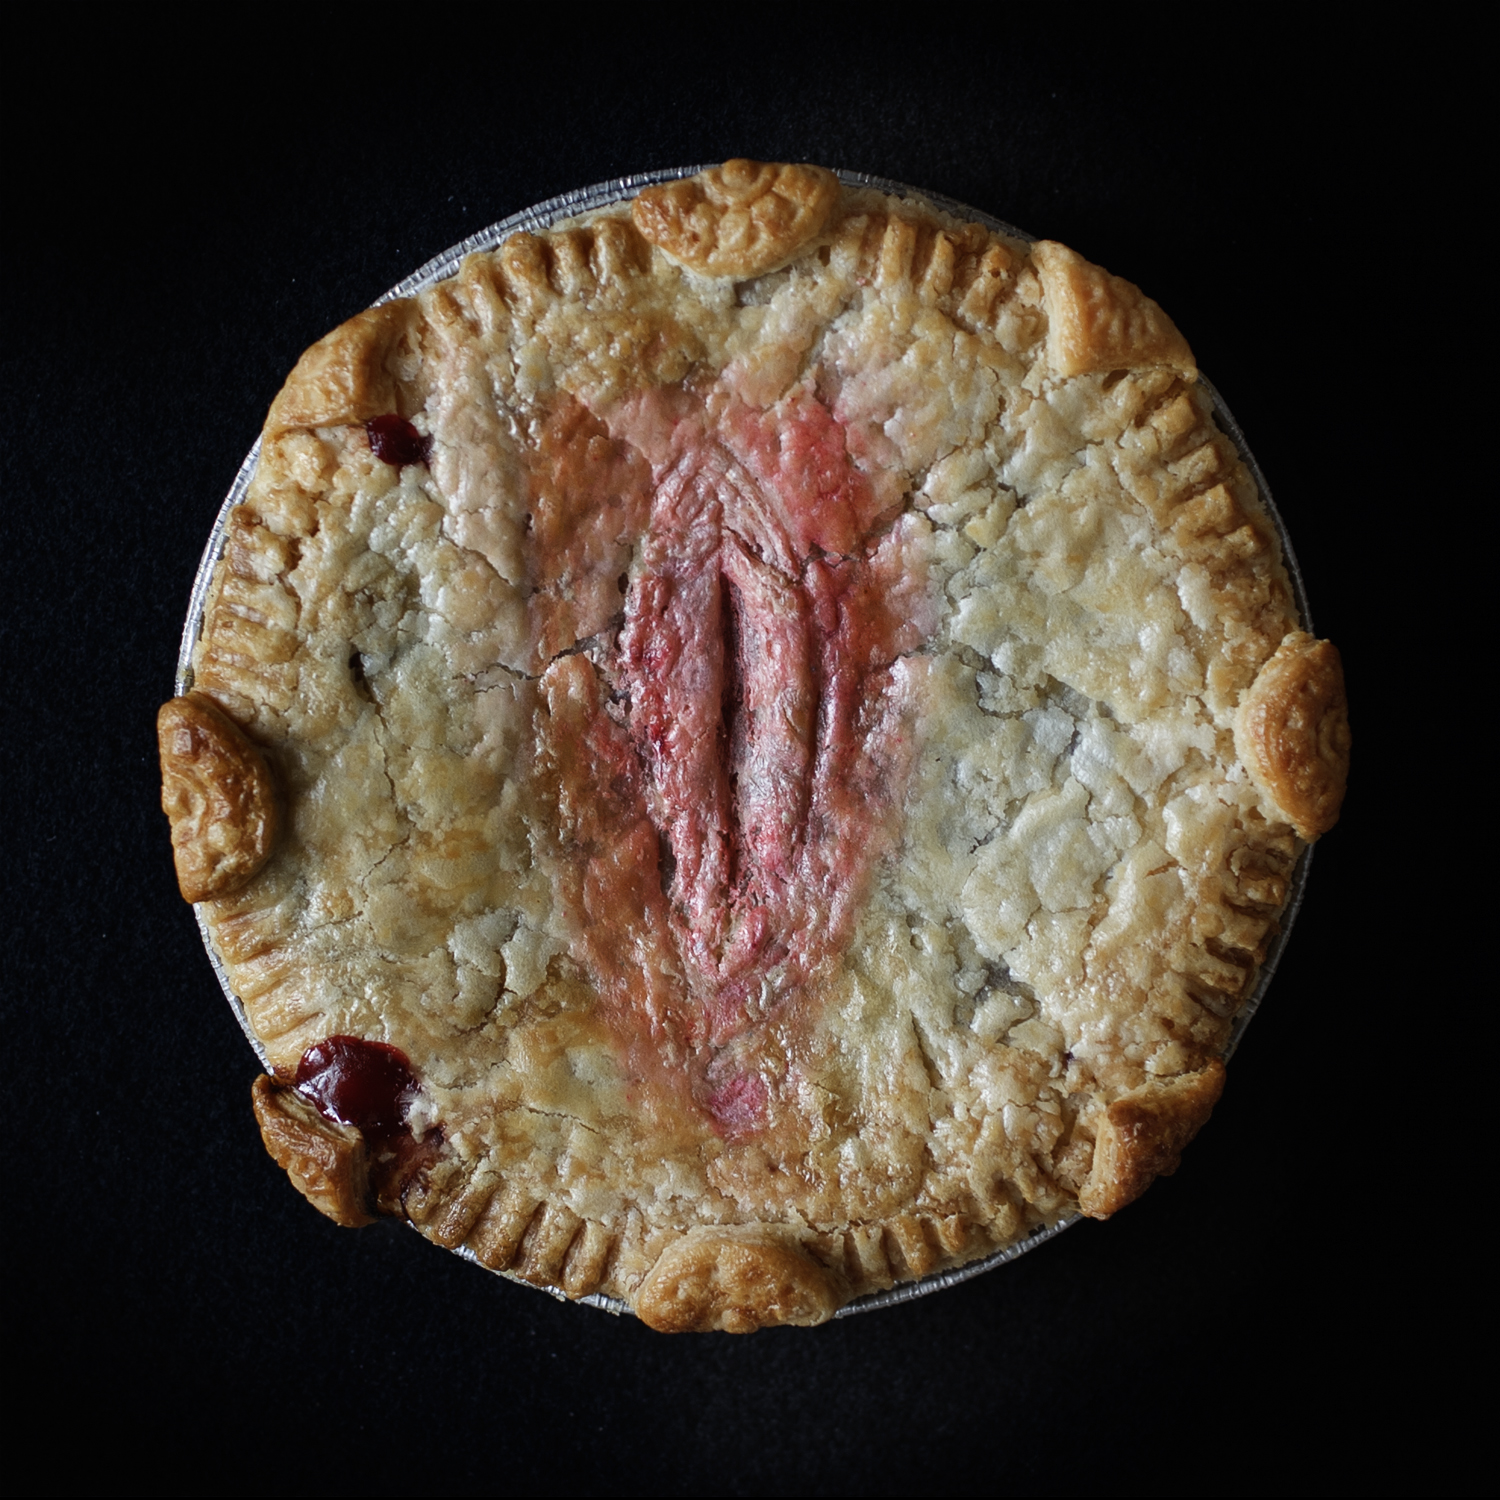 Baked pie with hand sculpted art on a black background. The pie art looks like a realistic vulva.